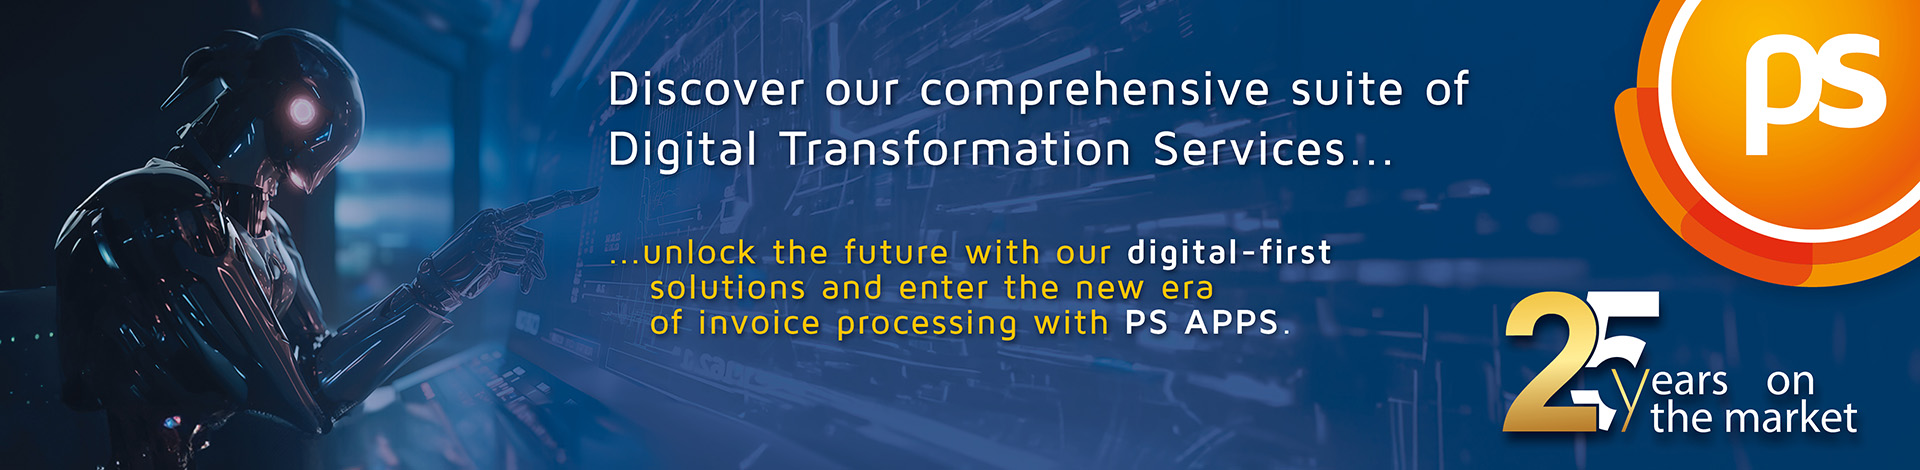 PS Digital transformation and touchless accounting services